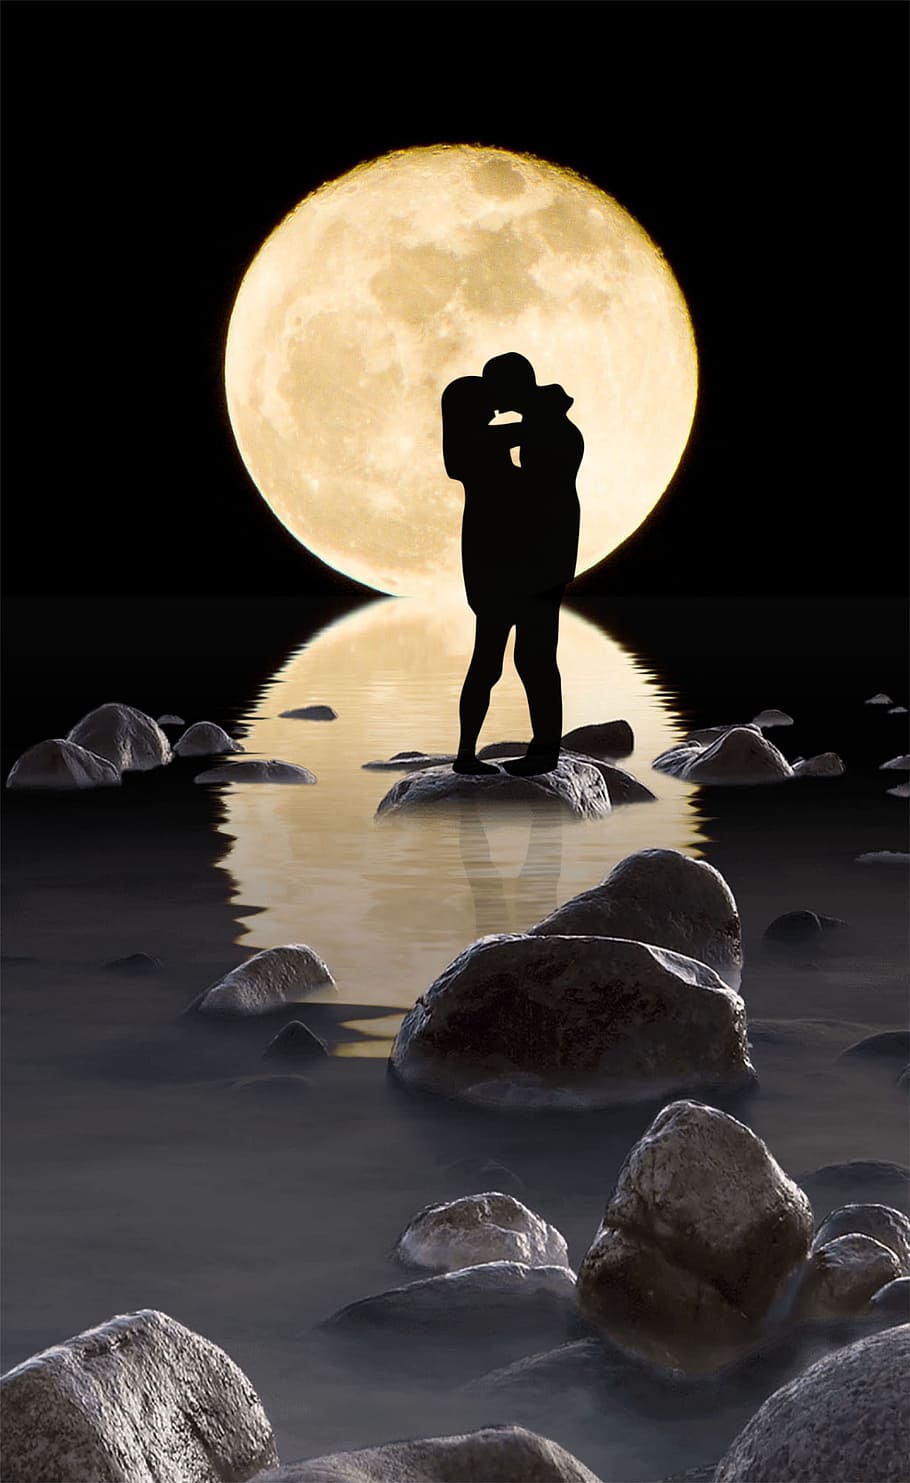 https://c1.wallpaperflare.com/preview/847/573/181/couple-kiss-moon-reflection.jpg